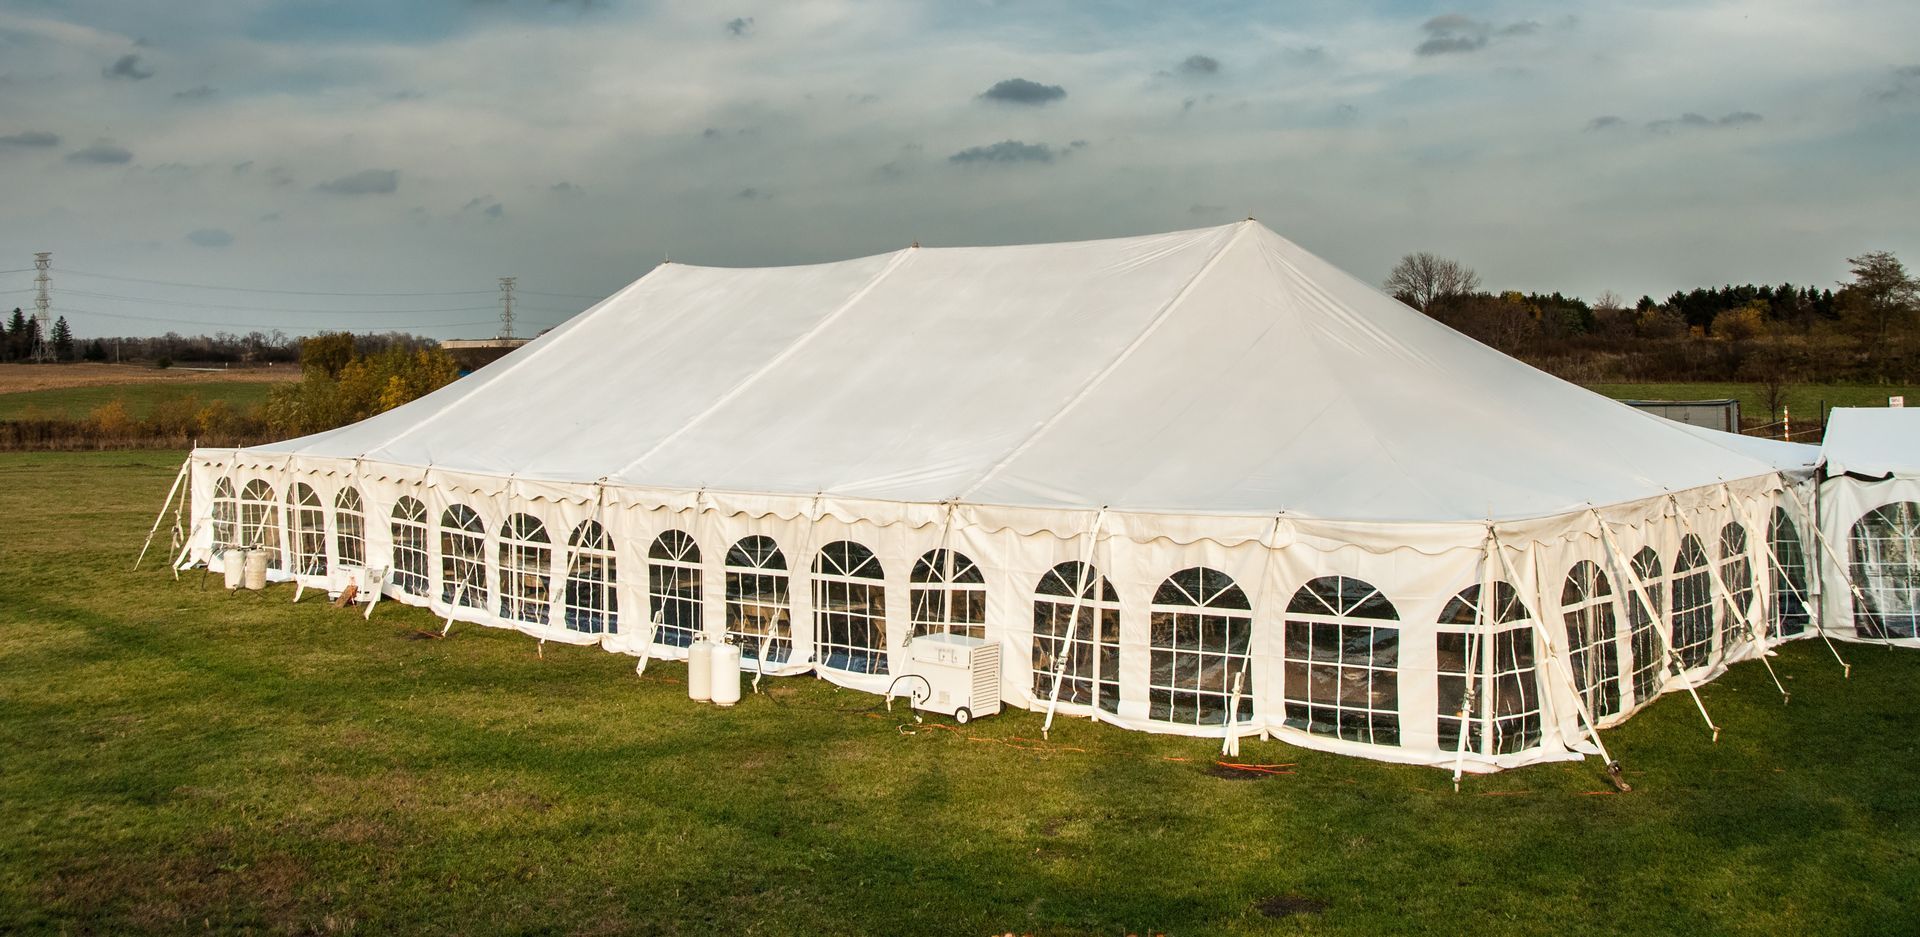 White banquet wedding tent or party tent at twilight time.